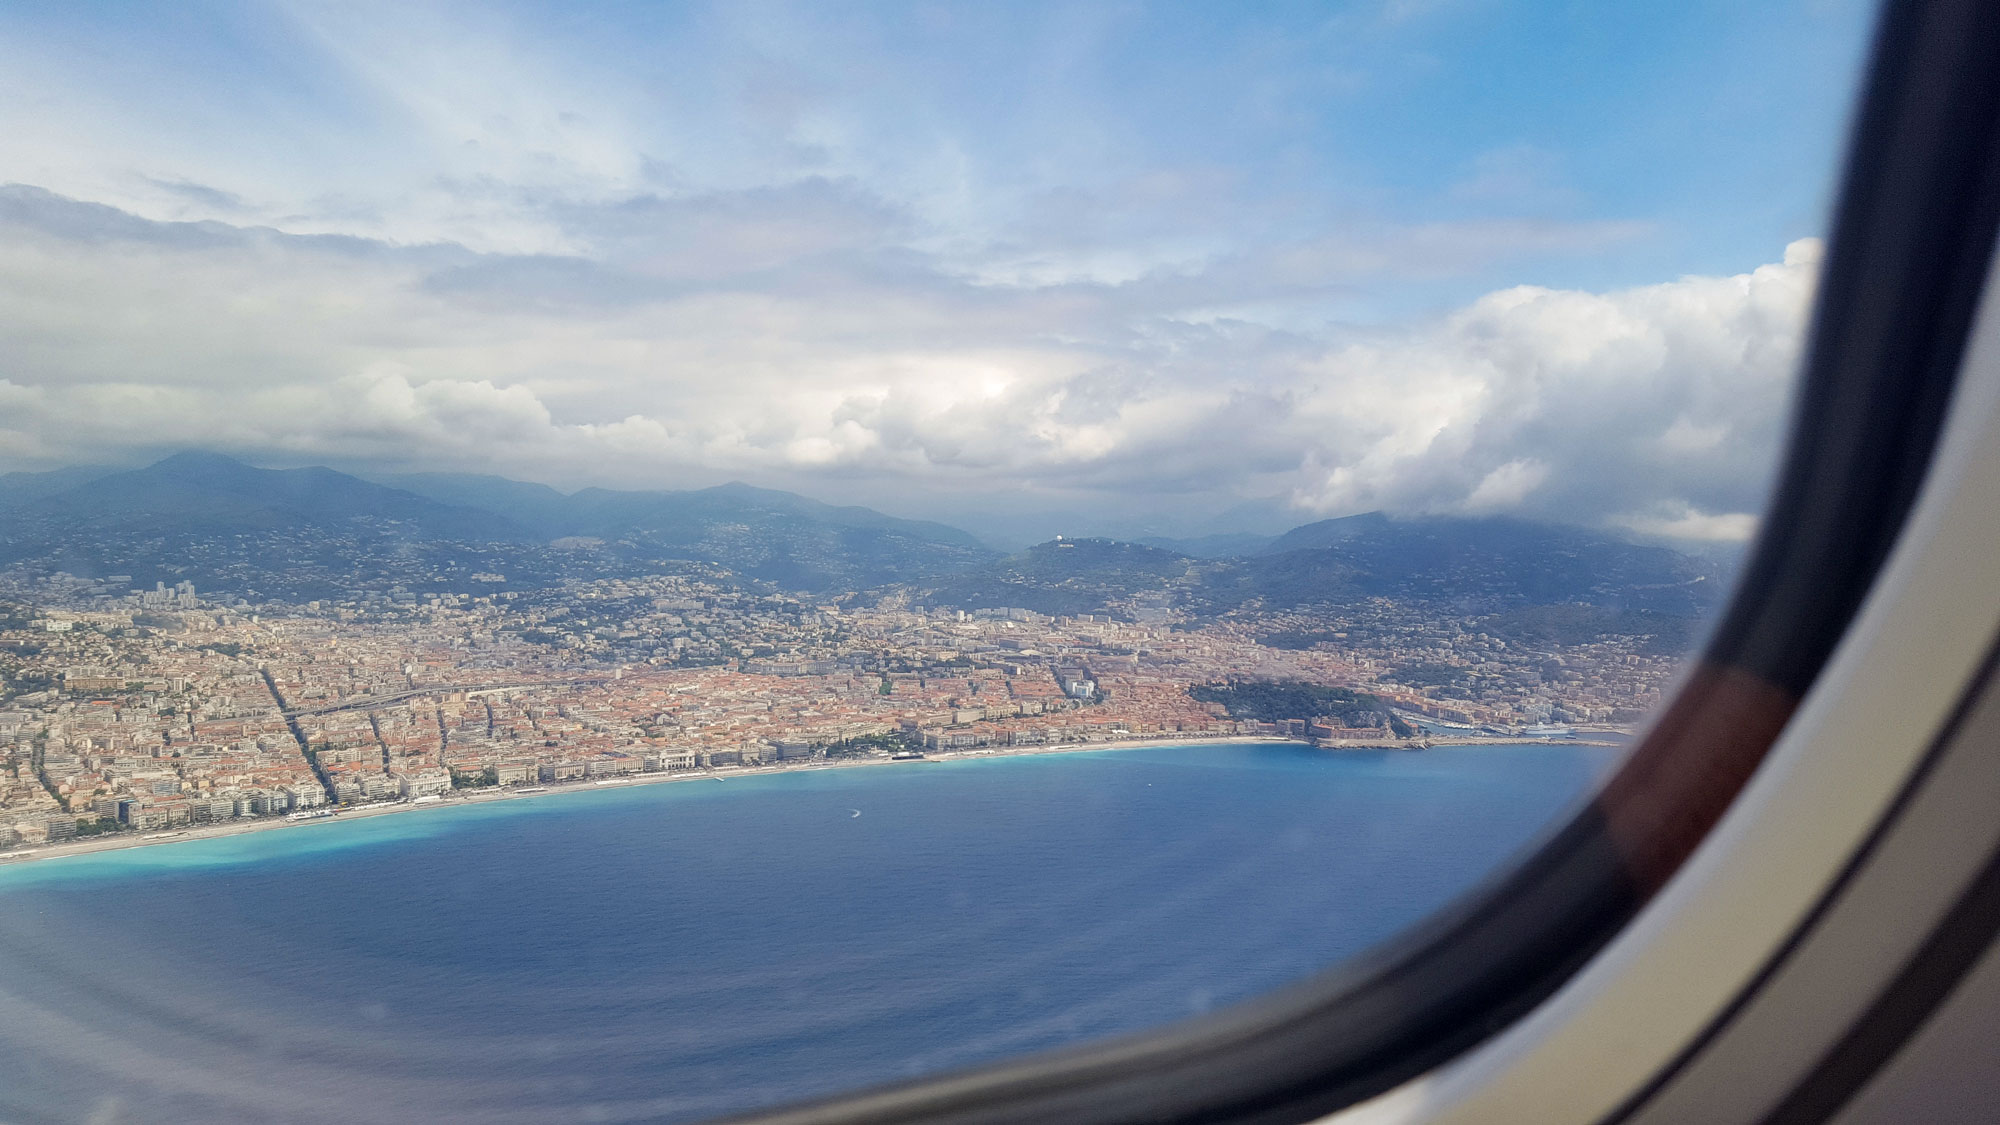 View over Nice, France, from the airplane